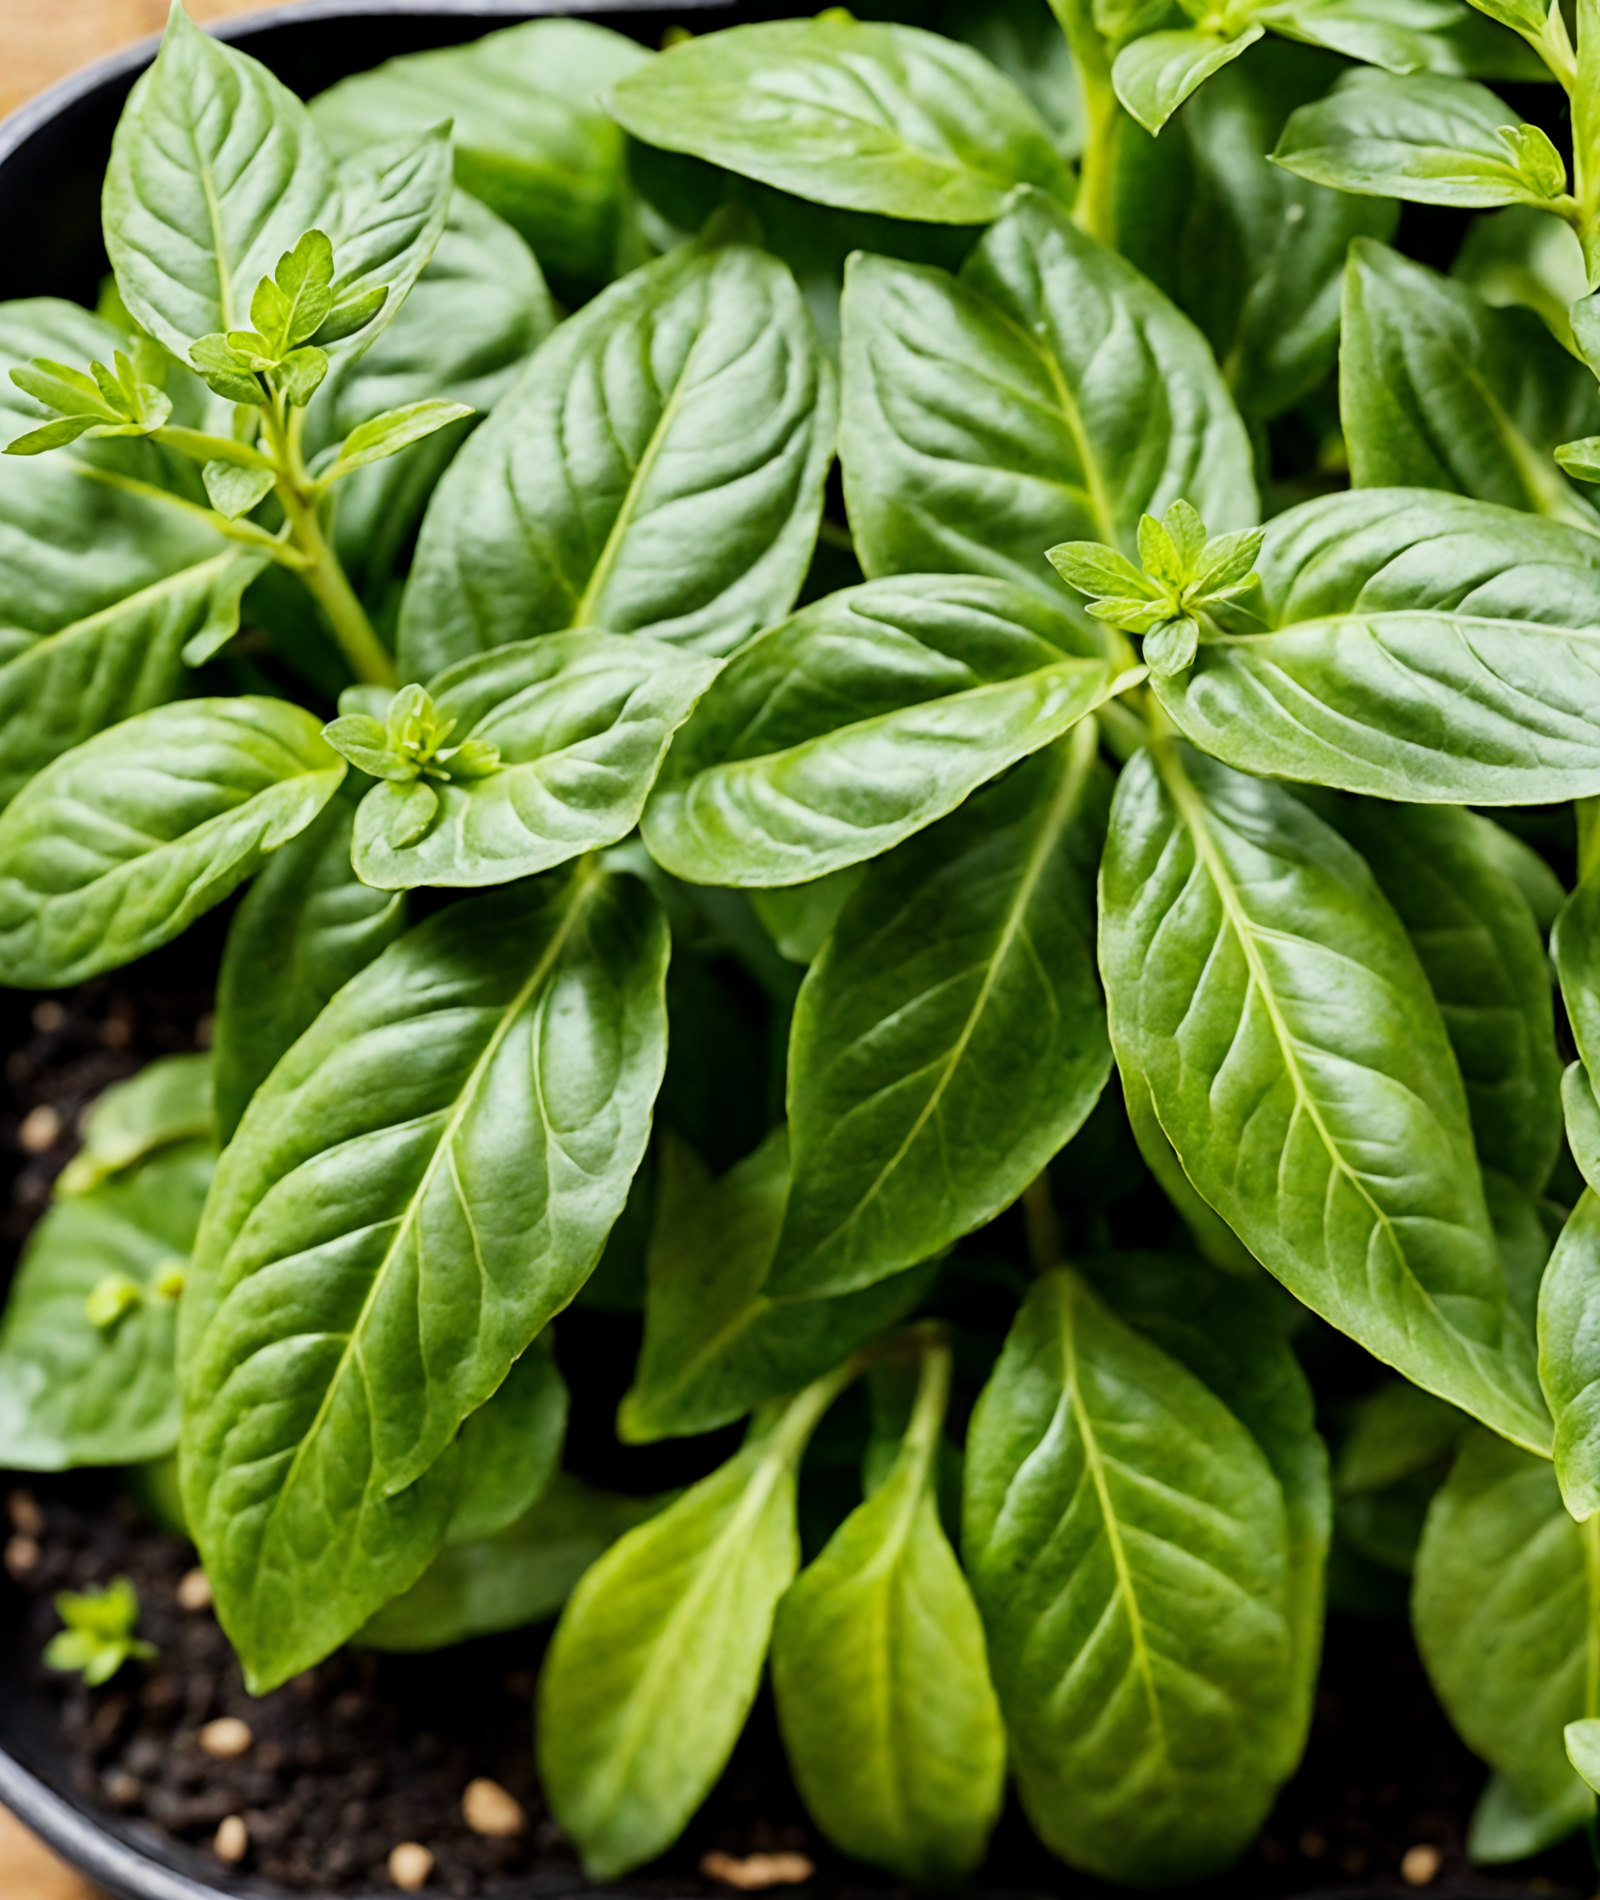 Potted Ocimum basilicum (basil) with vibrant green leaves in a bowl, clear lighting, against a dark background.